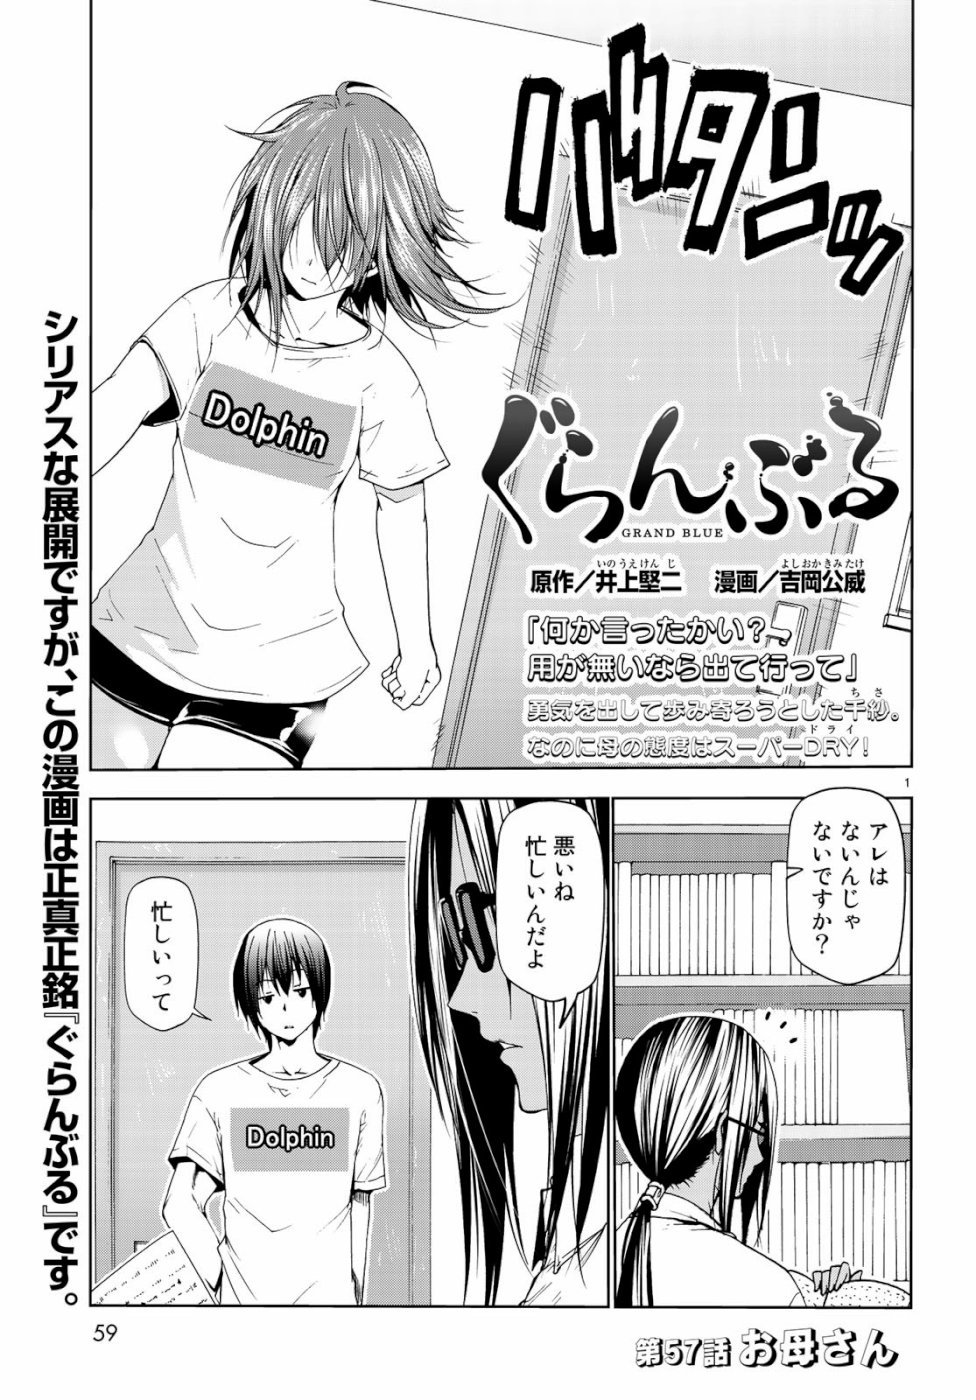 Chapter 1, Grand Blue Wiki